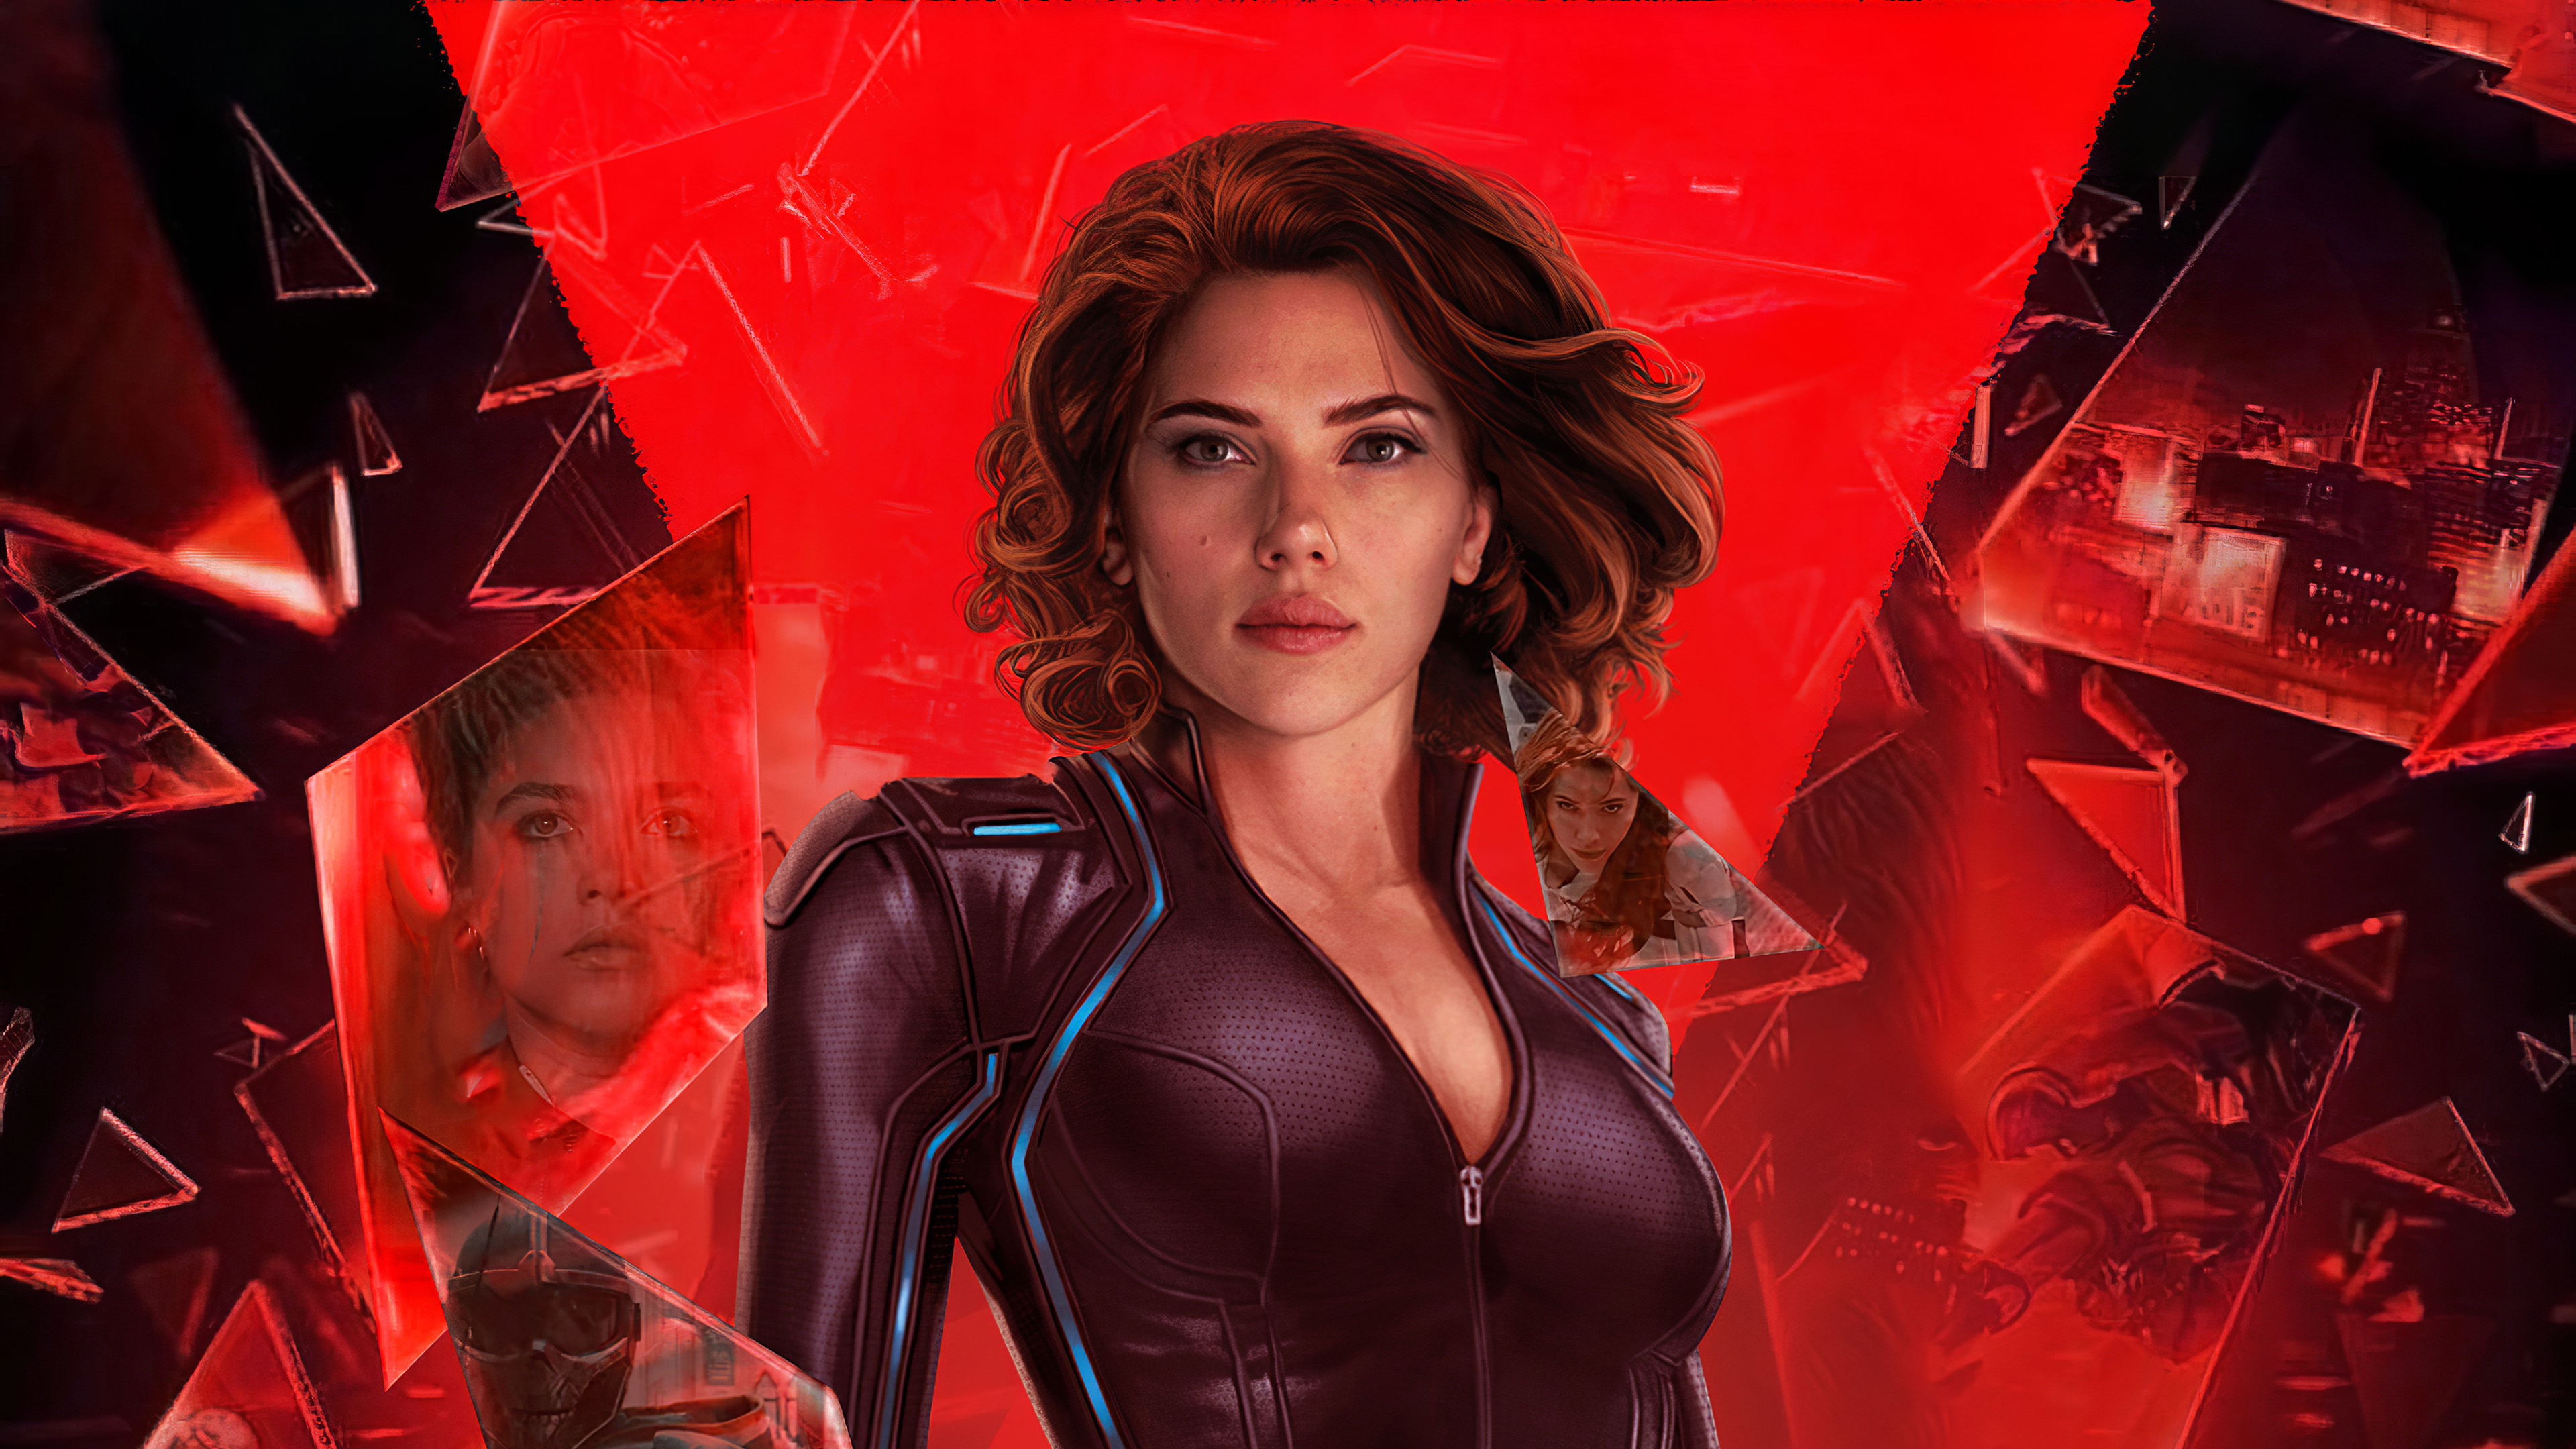 80+ Black Widow HD Wallpapers and Backgrounds